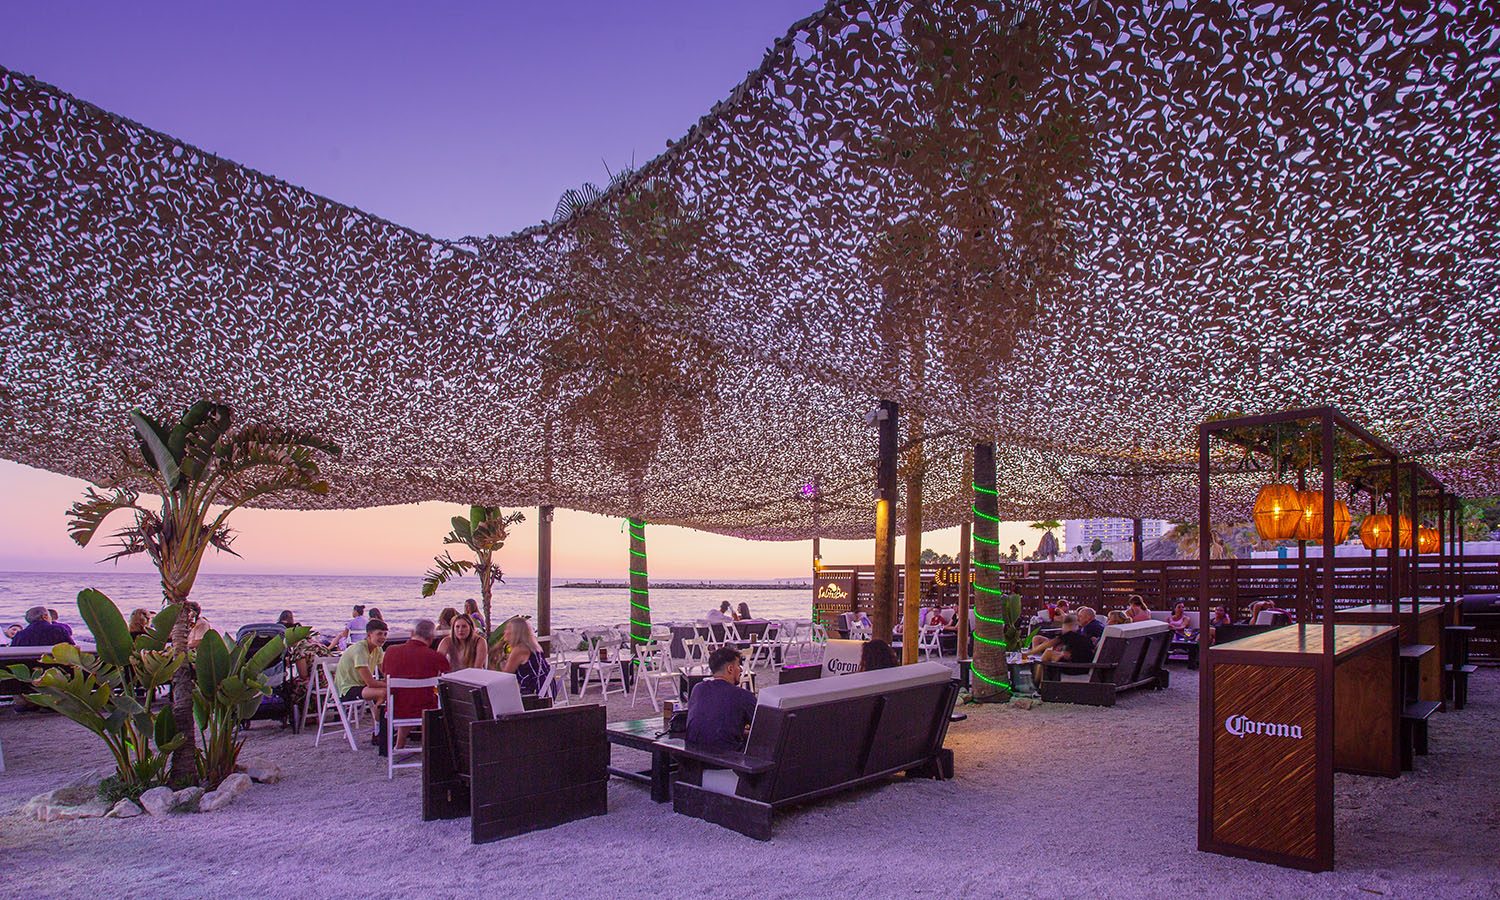 There is no better place to enjoy an after-dinner drink by the sea